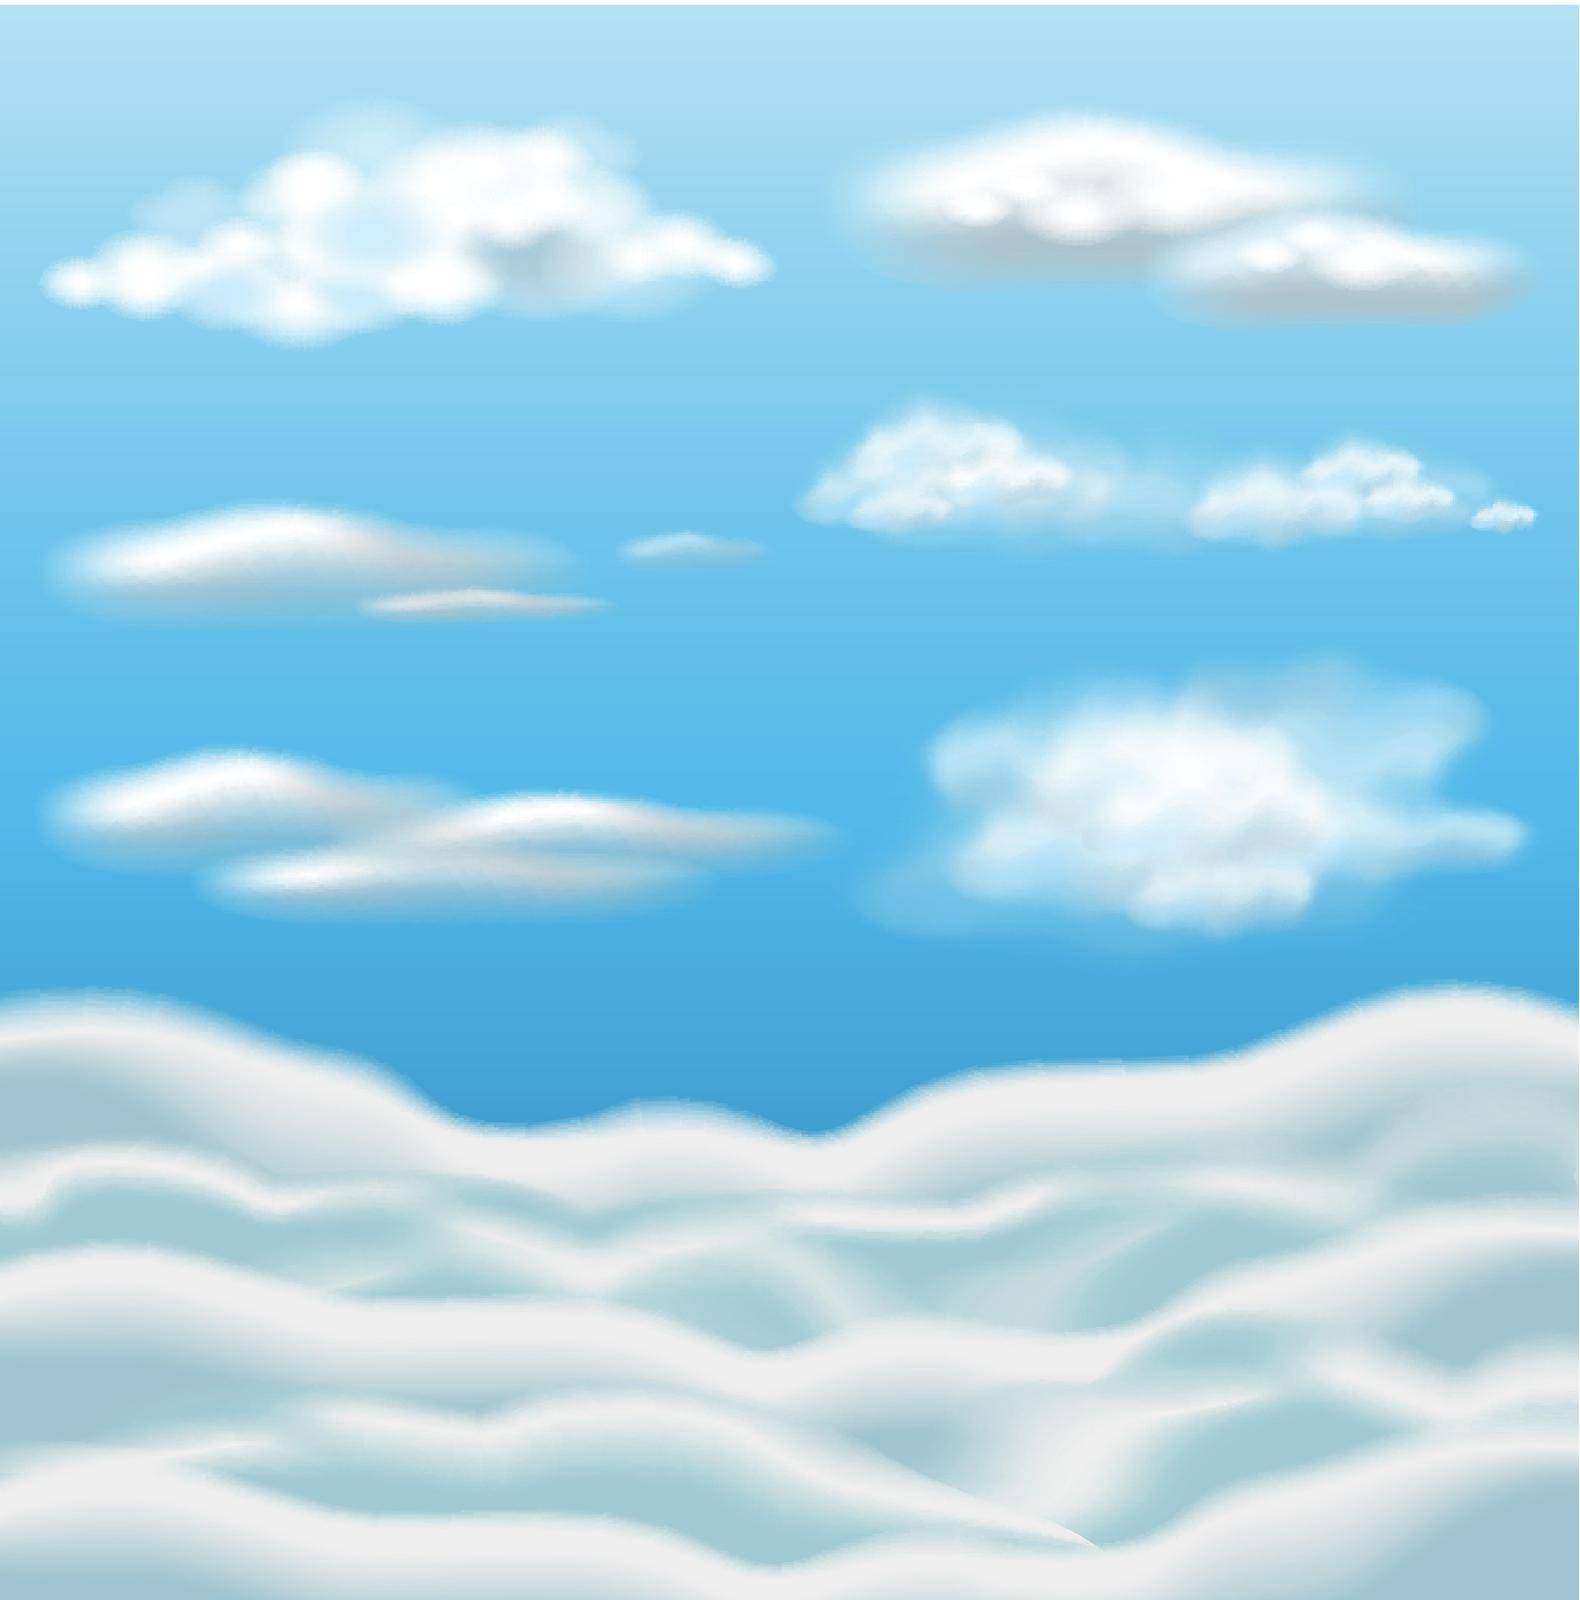 Blue sky with clouds illustration